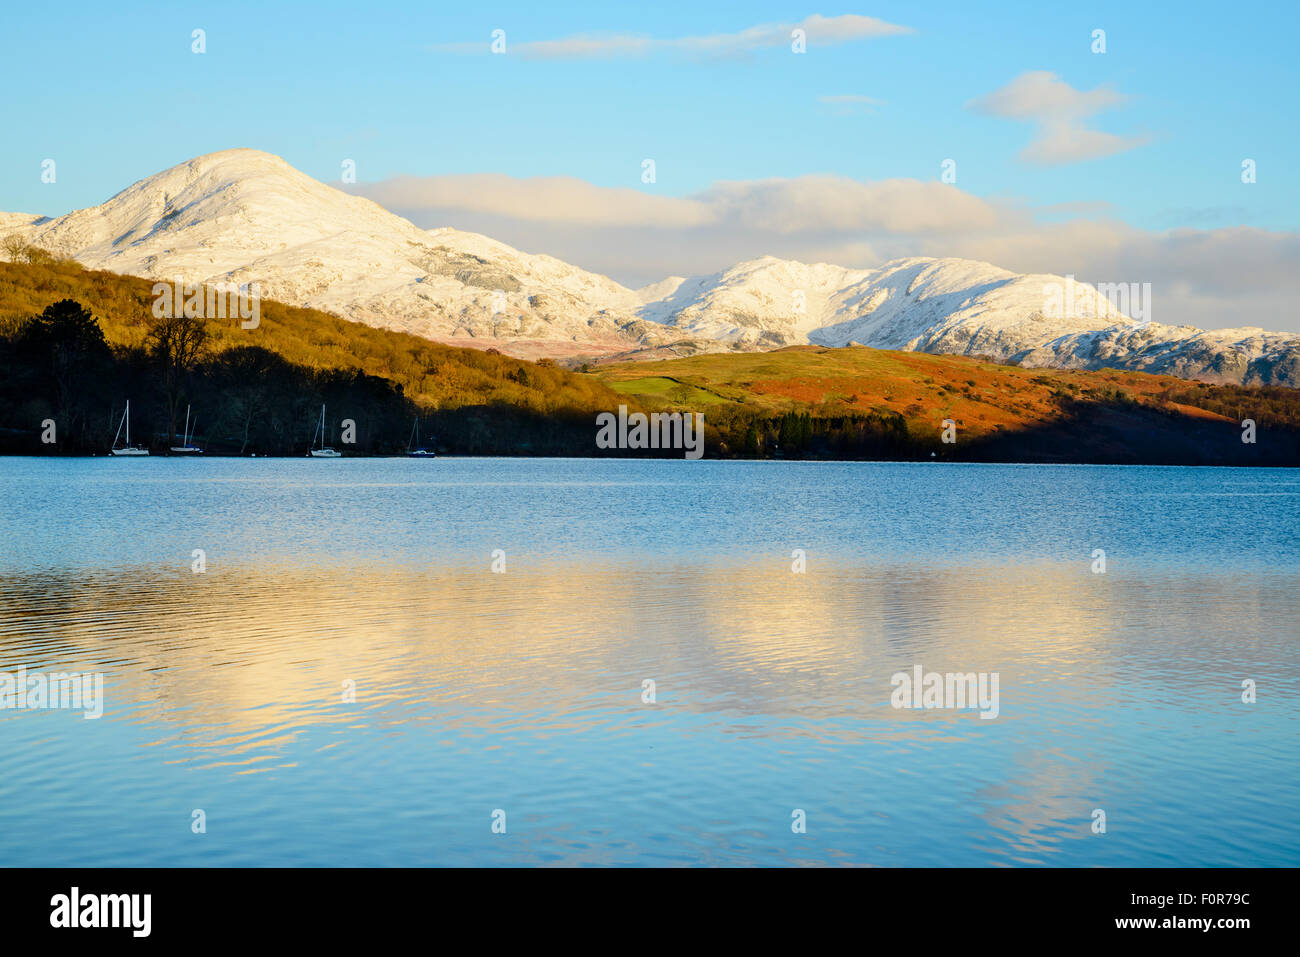 Snowy Coniston fells (Coniston Old Man and Wetherlam) reflected in Coniston Water, Lake District, early morning Stock Photo